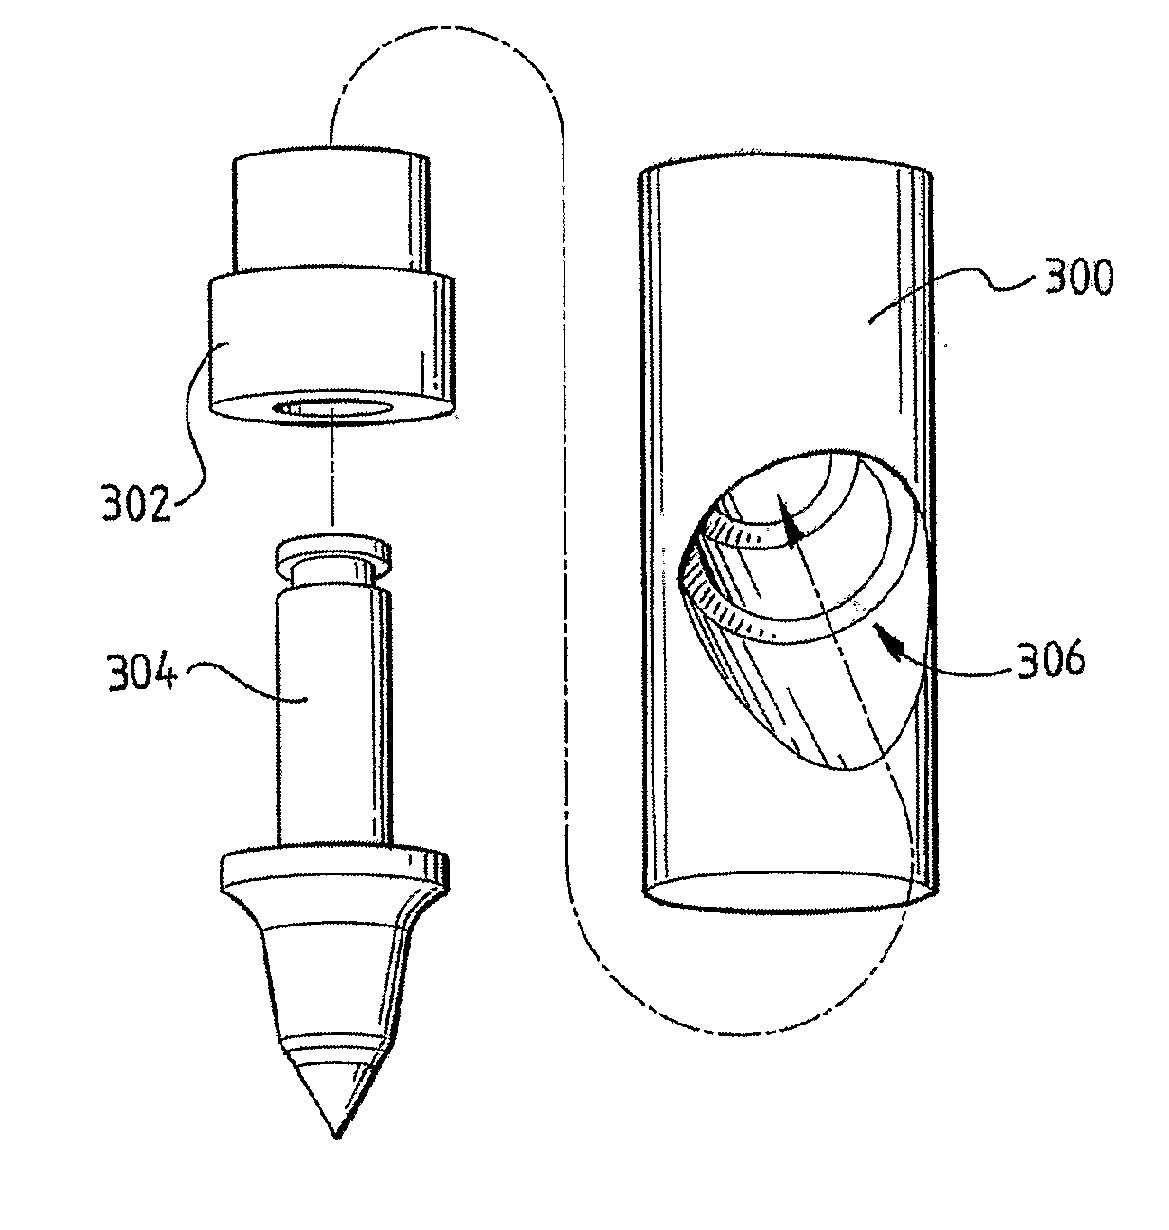 Holder for holding a tooth on a body of a cutting blade or grinding drum for cutting or grinding rock or hard earth formations